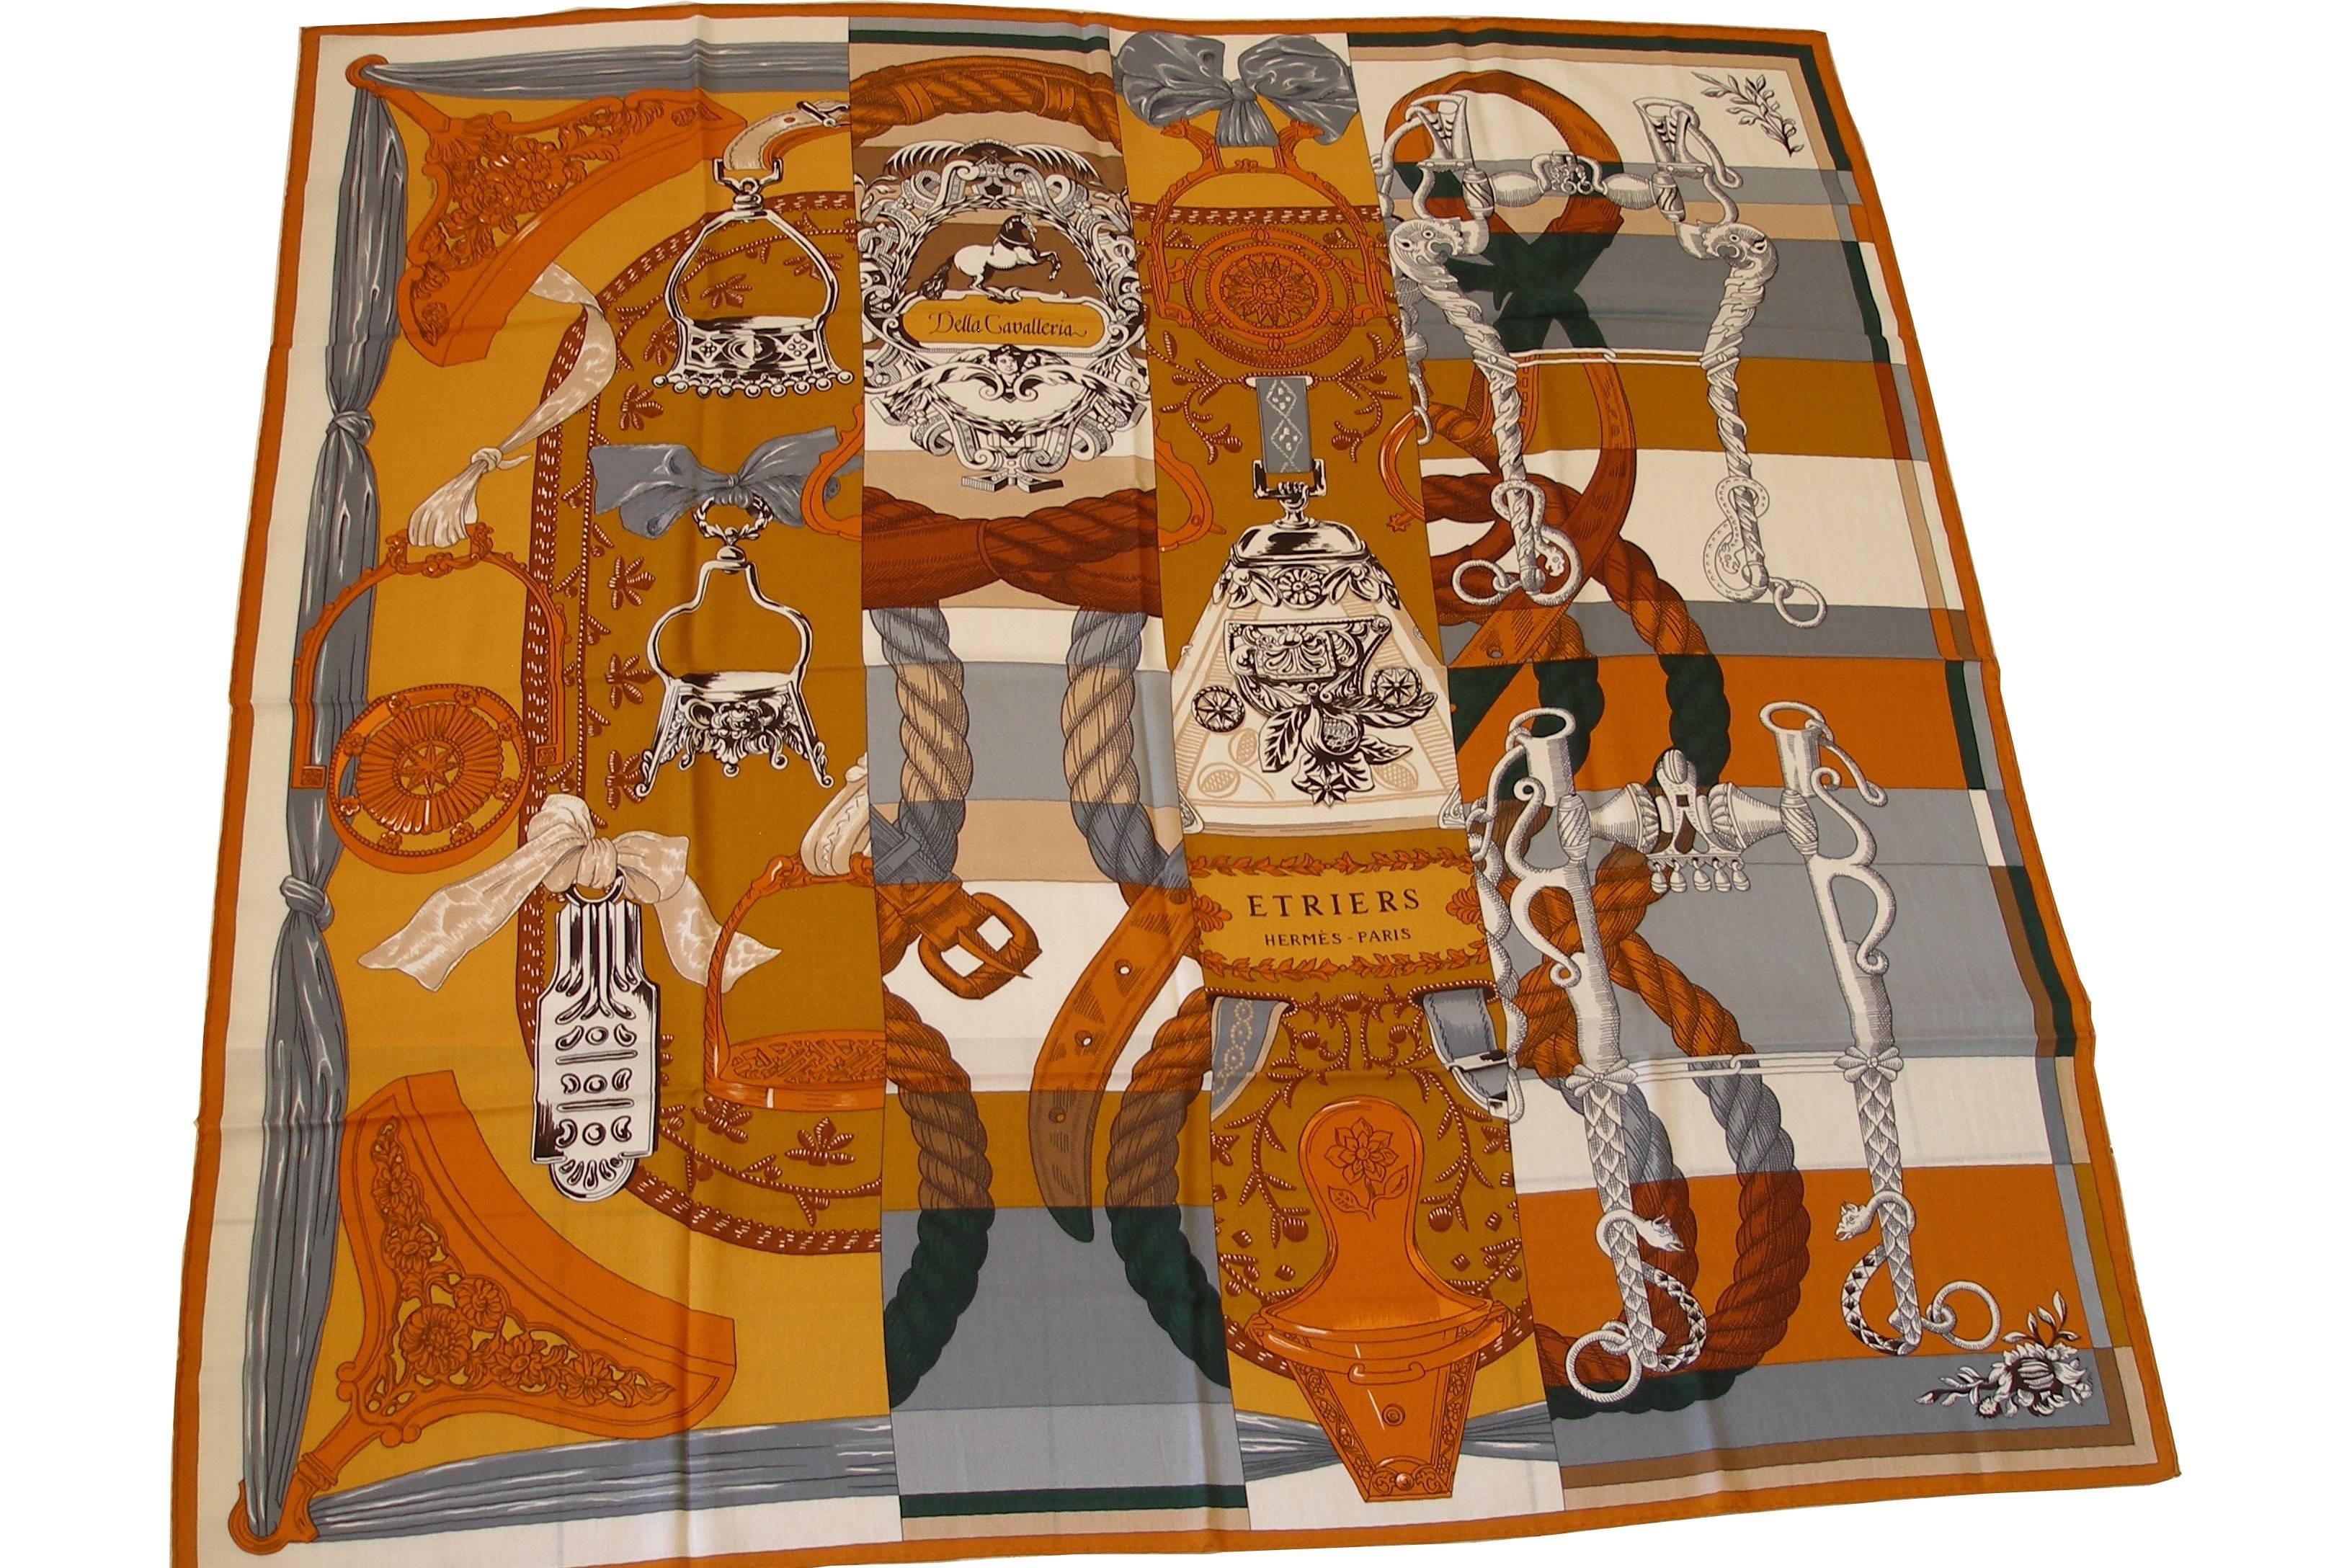 Brand new and never worn
Hermès Della Cavalleria Shawl
Designed by Virginie Jamin
Size 140 cm x 140 cm 
Color : caramel - gris - blanc 
Sorry no Box , it's comes with Hermès shopping bag & ribbon .